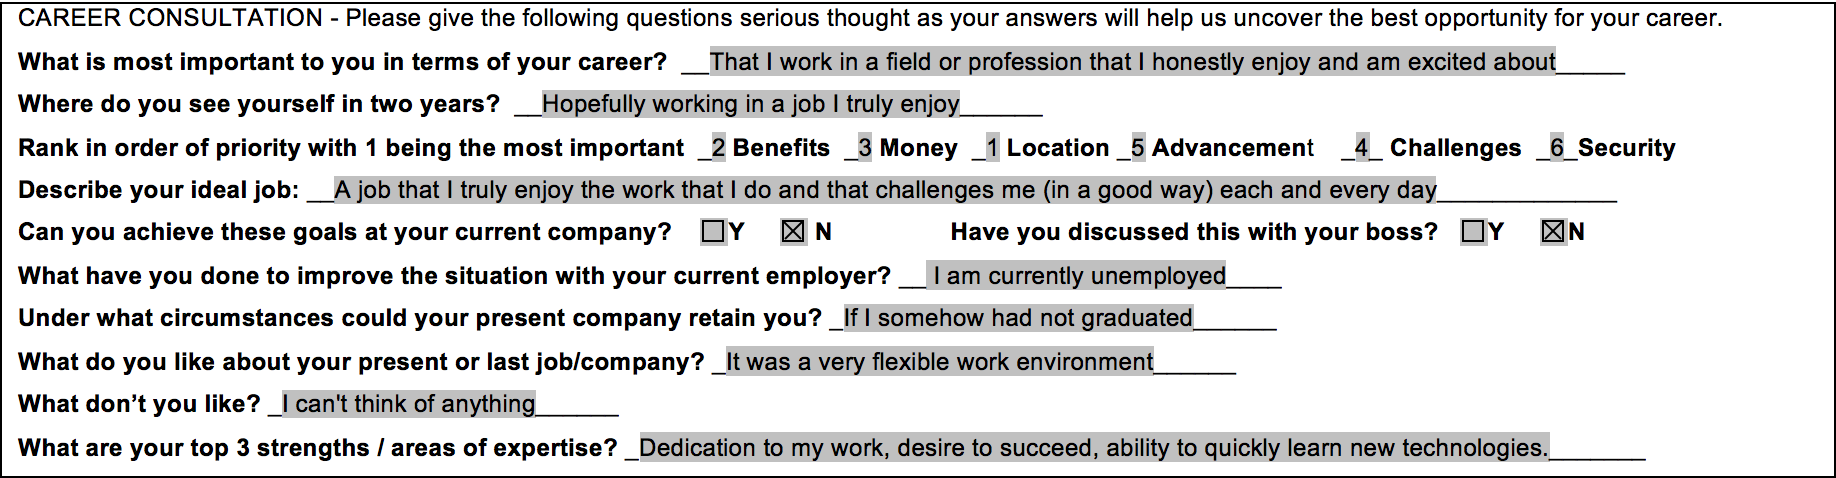 personal-profile-career-consultation.png